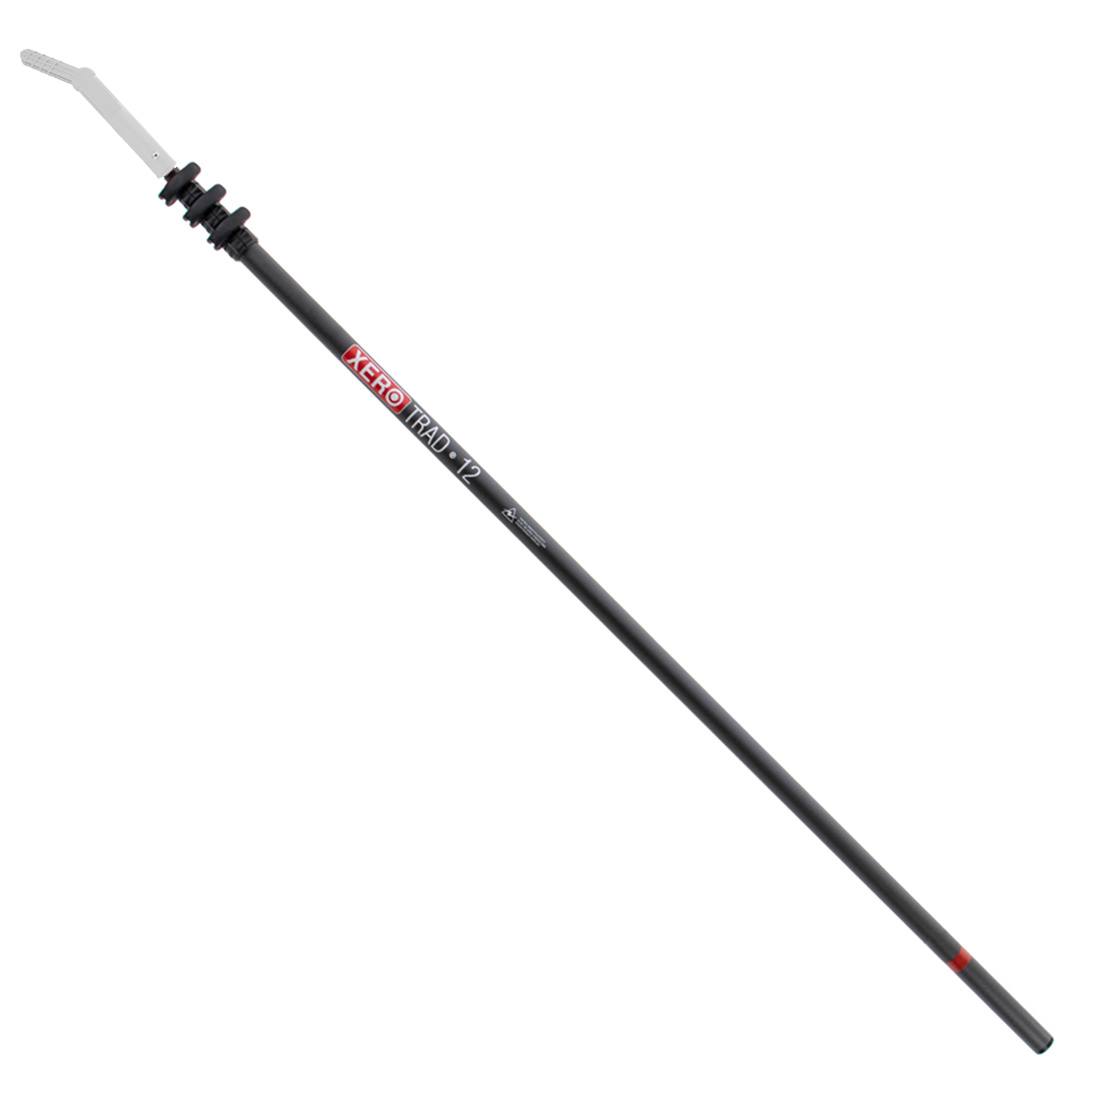 XERO Carbon Fiber Trad Pole 2.0 Wagtail Tip 12 Foot Front View